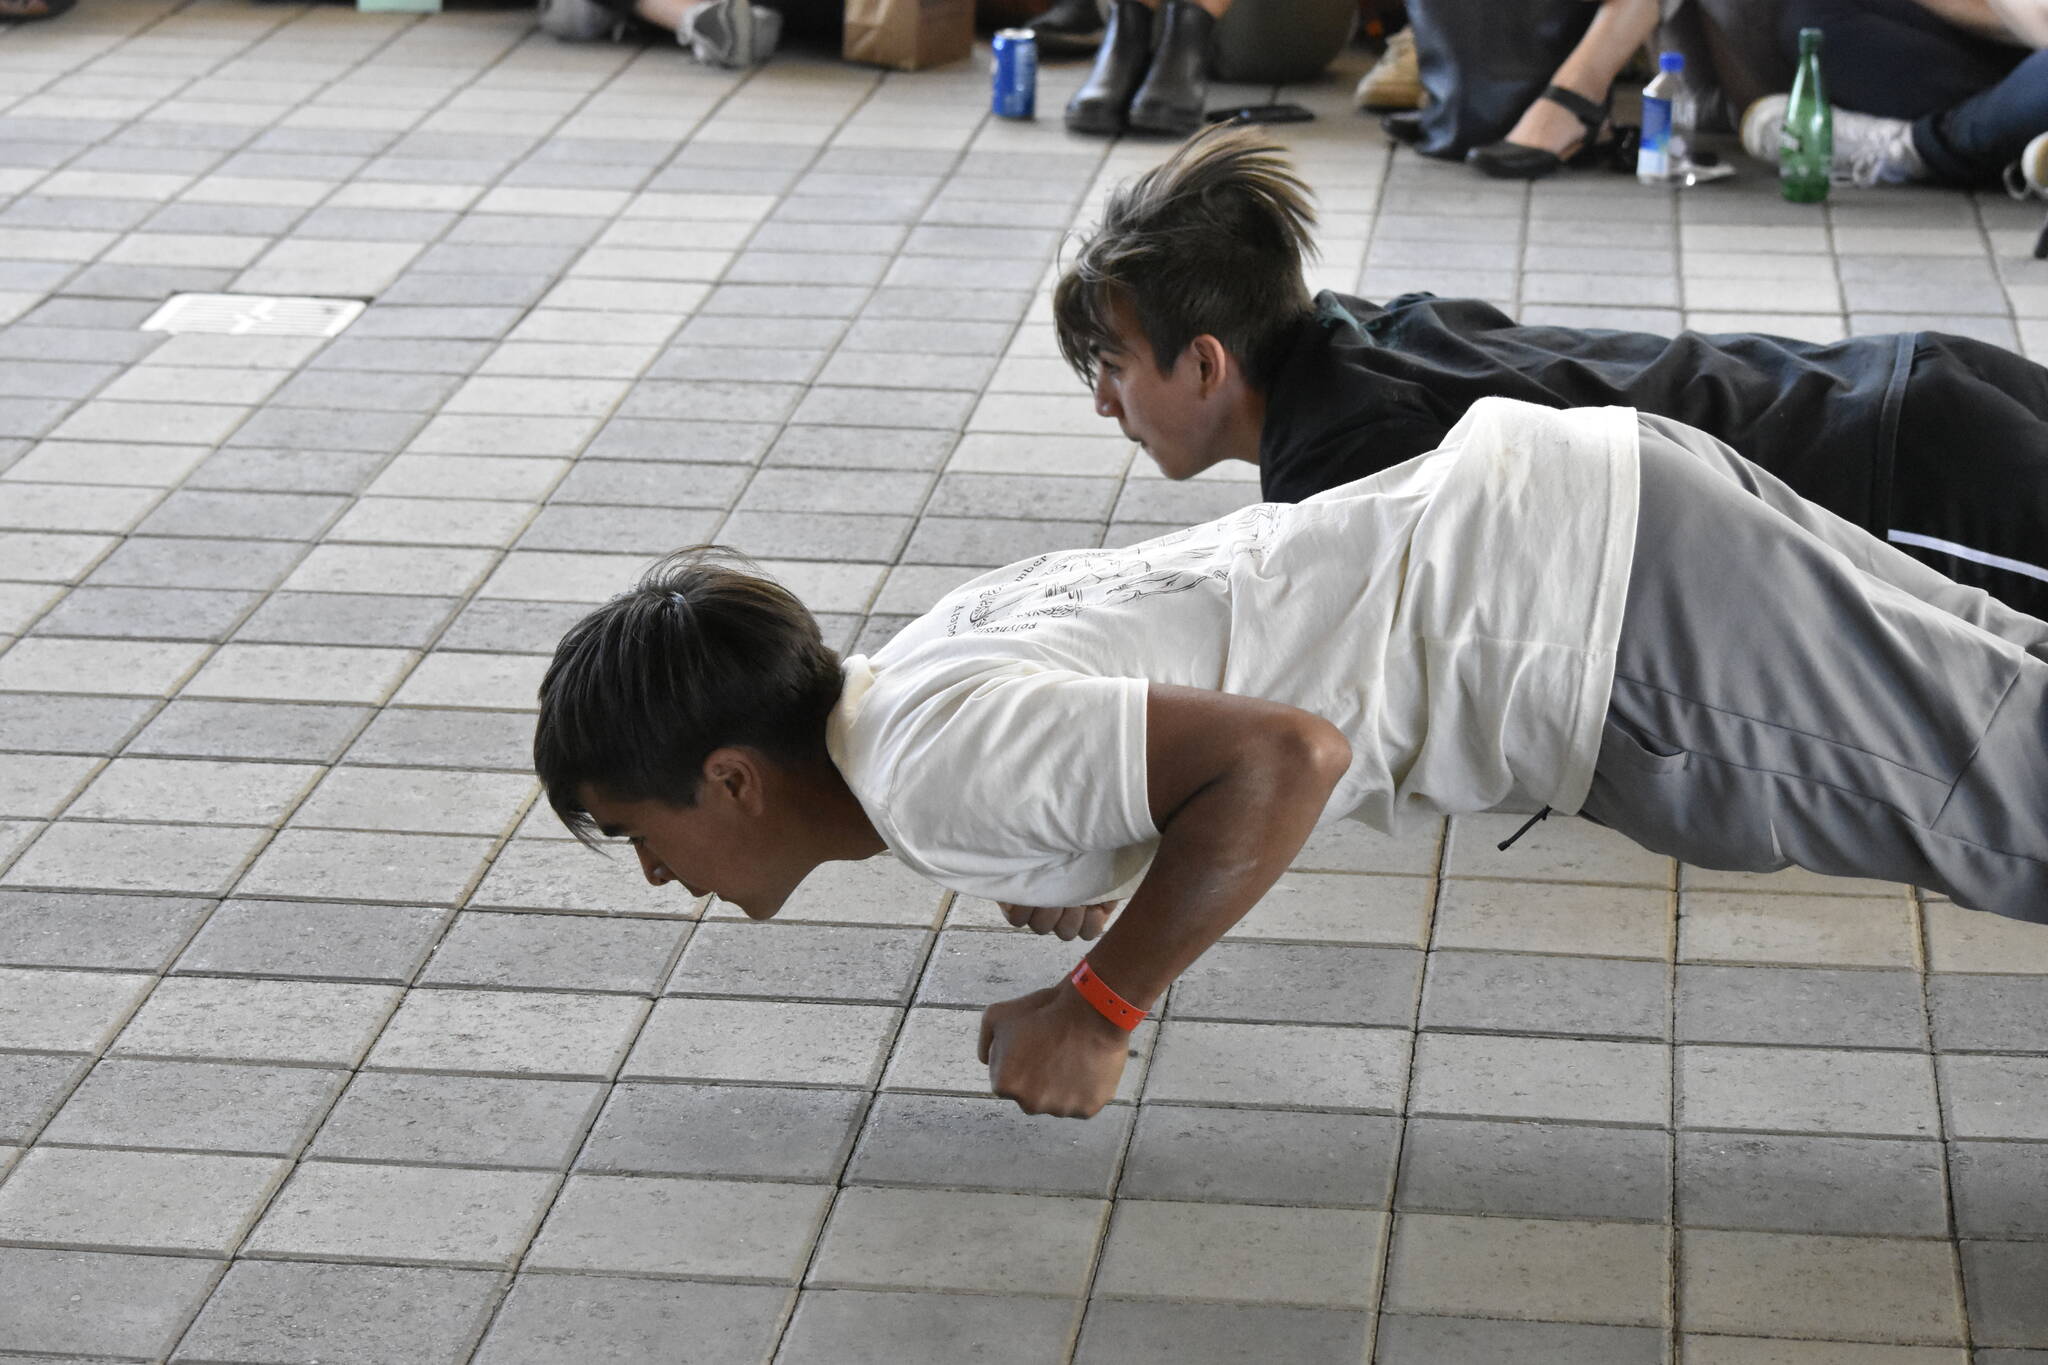 Nathan Blake, left, and Alex Marx-Beierly demonstrate a crawl meant to mimic the movements of a seal on an ice float during a demonstration of traditional games at the Sealaska Arts Campus on Thursday, June 8, 2022. (Peter Segall / Juneau Empire)